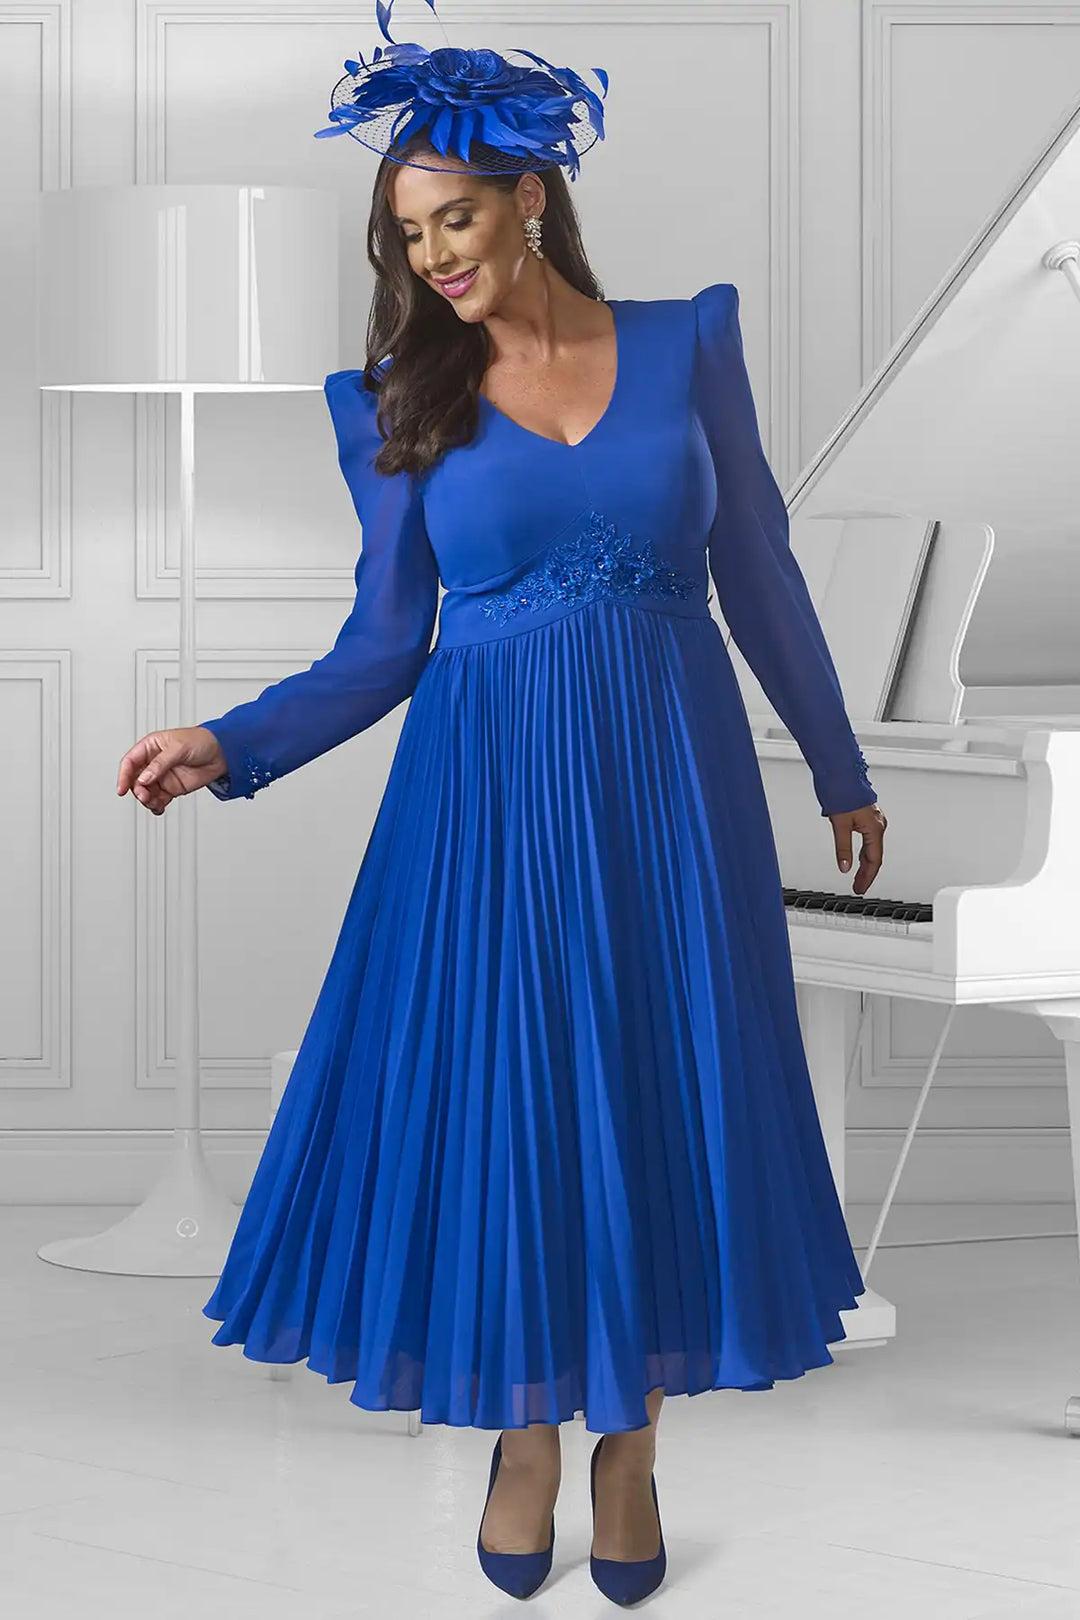 Elegant woman in a Dressed Up by Veromia DU595E full-length pleated cobalt blue gown with V-neckline, long sheer sleeves, and delicate floral lace appliques.